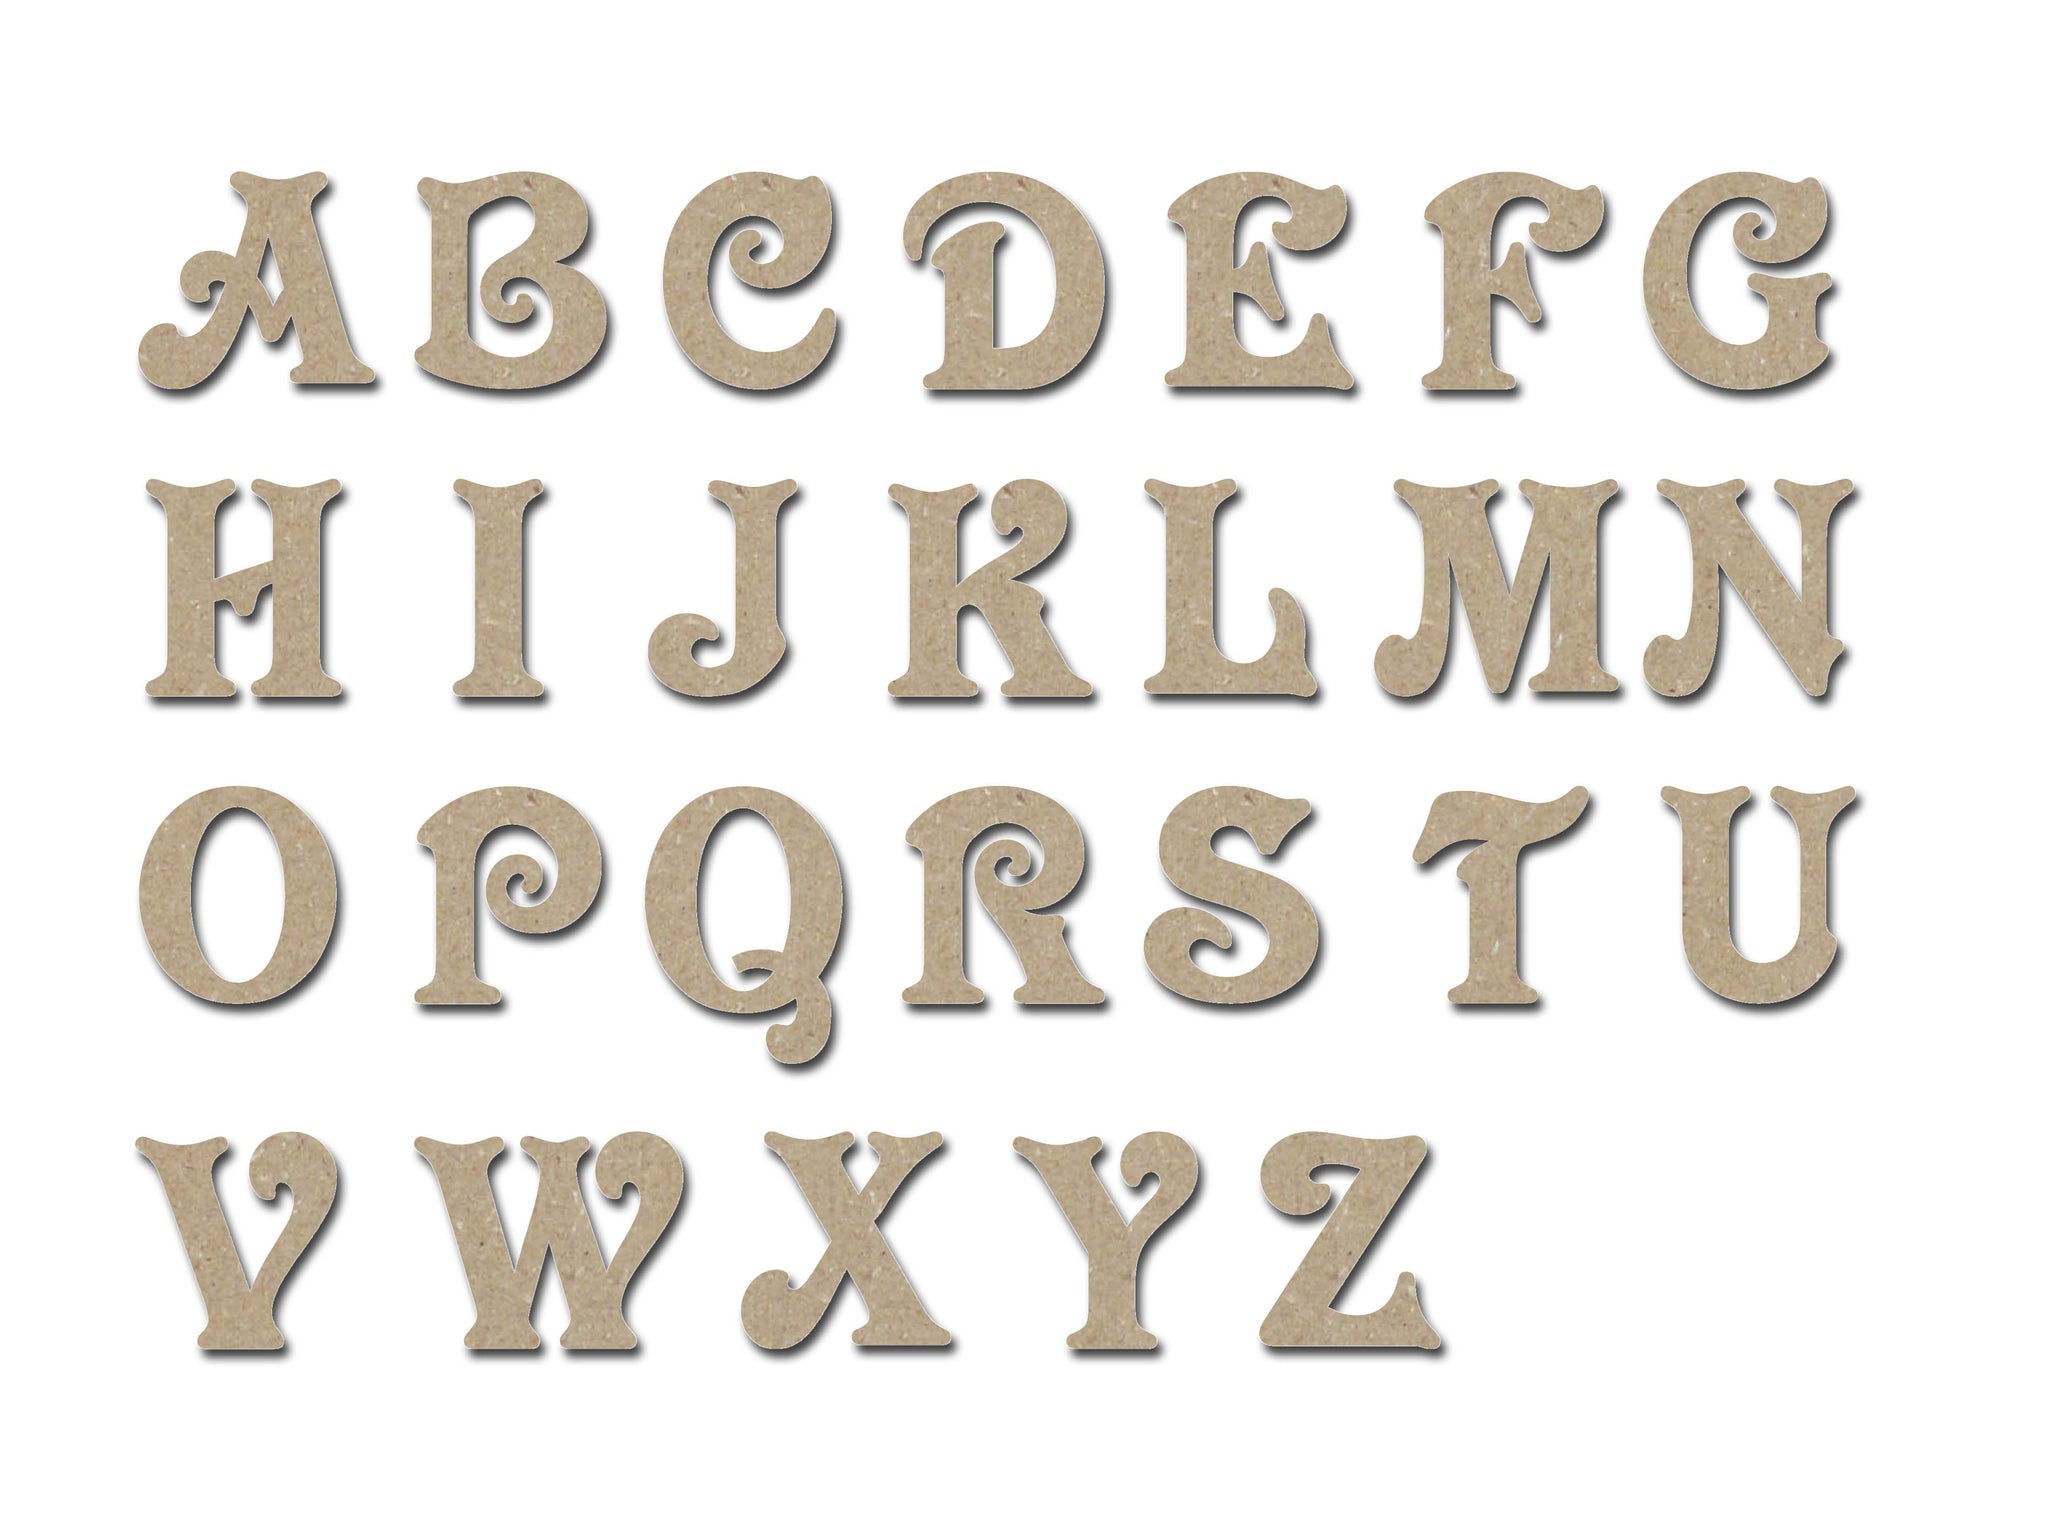 Pack of 1, 4 Inch x 1/4 Inch O Wood Letters in The Century Gothic Font for  Wood Craft Project, Children or Adult Art Work, Home and Holiday Décor and  DIY Fun